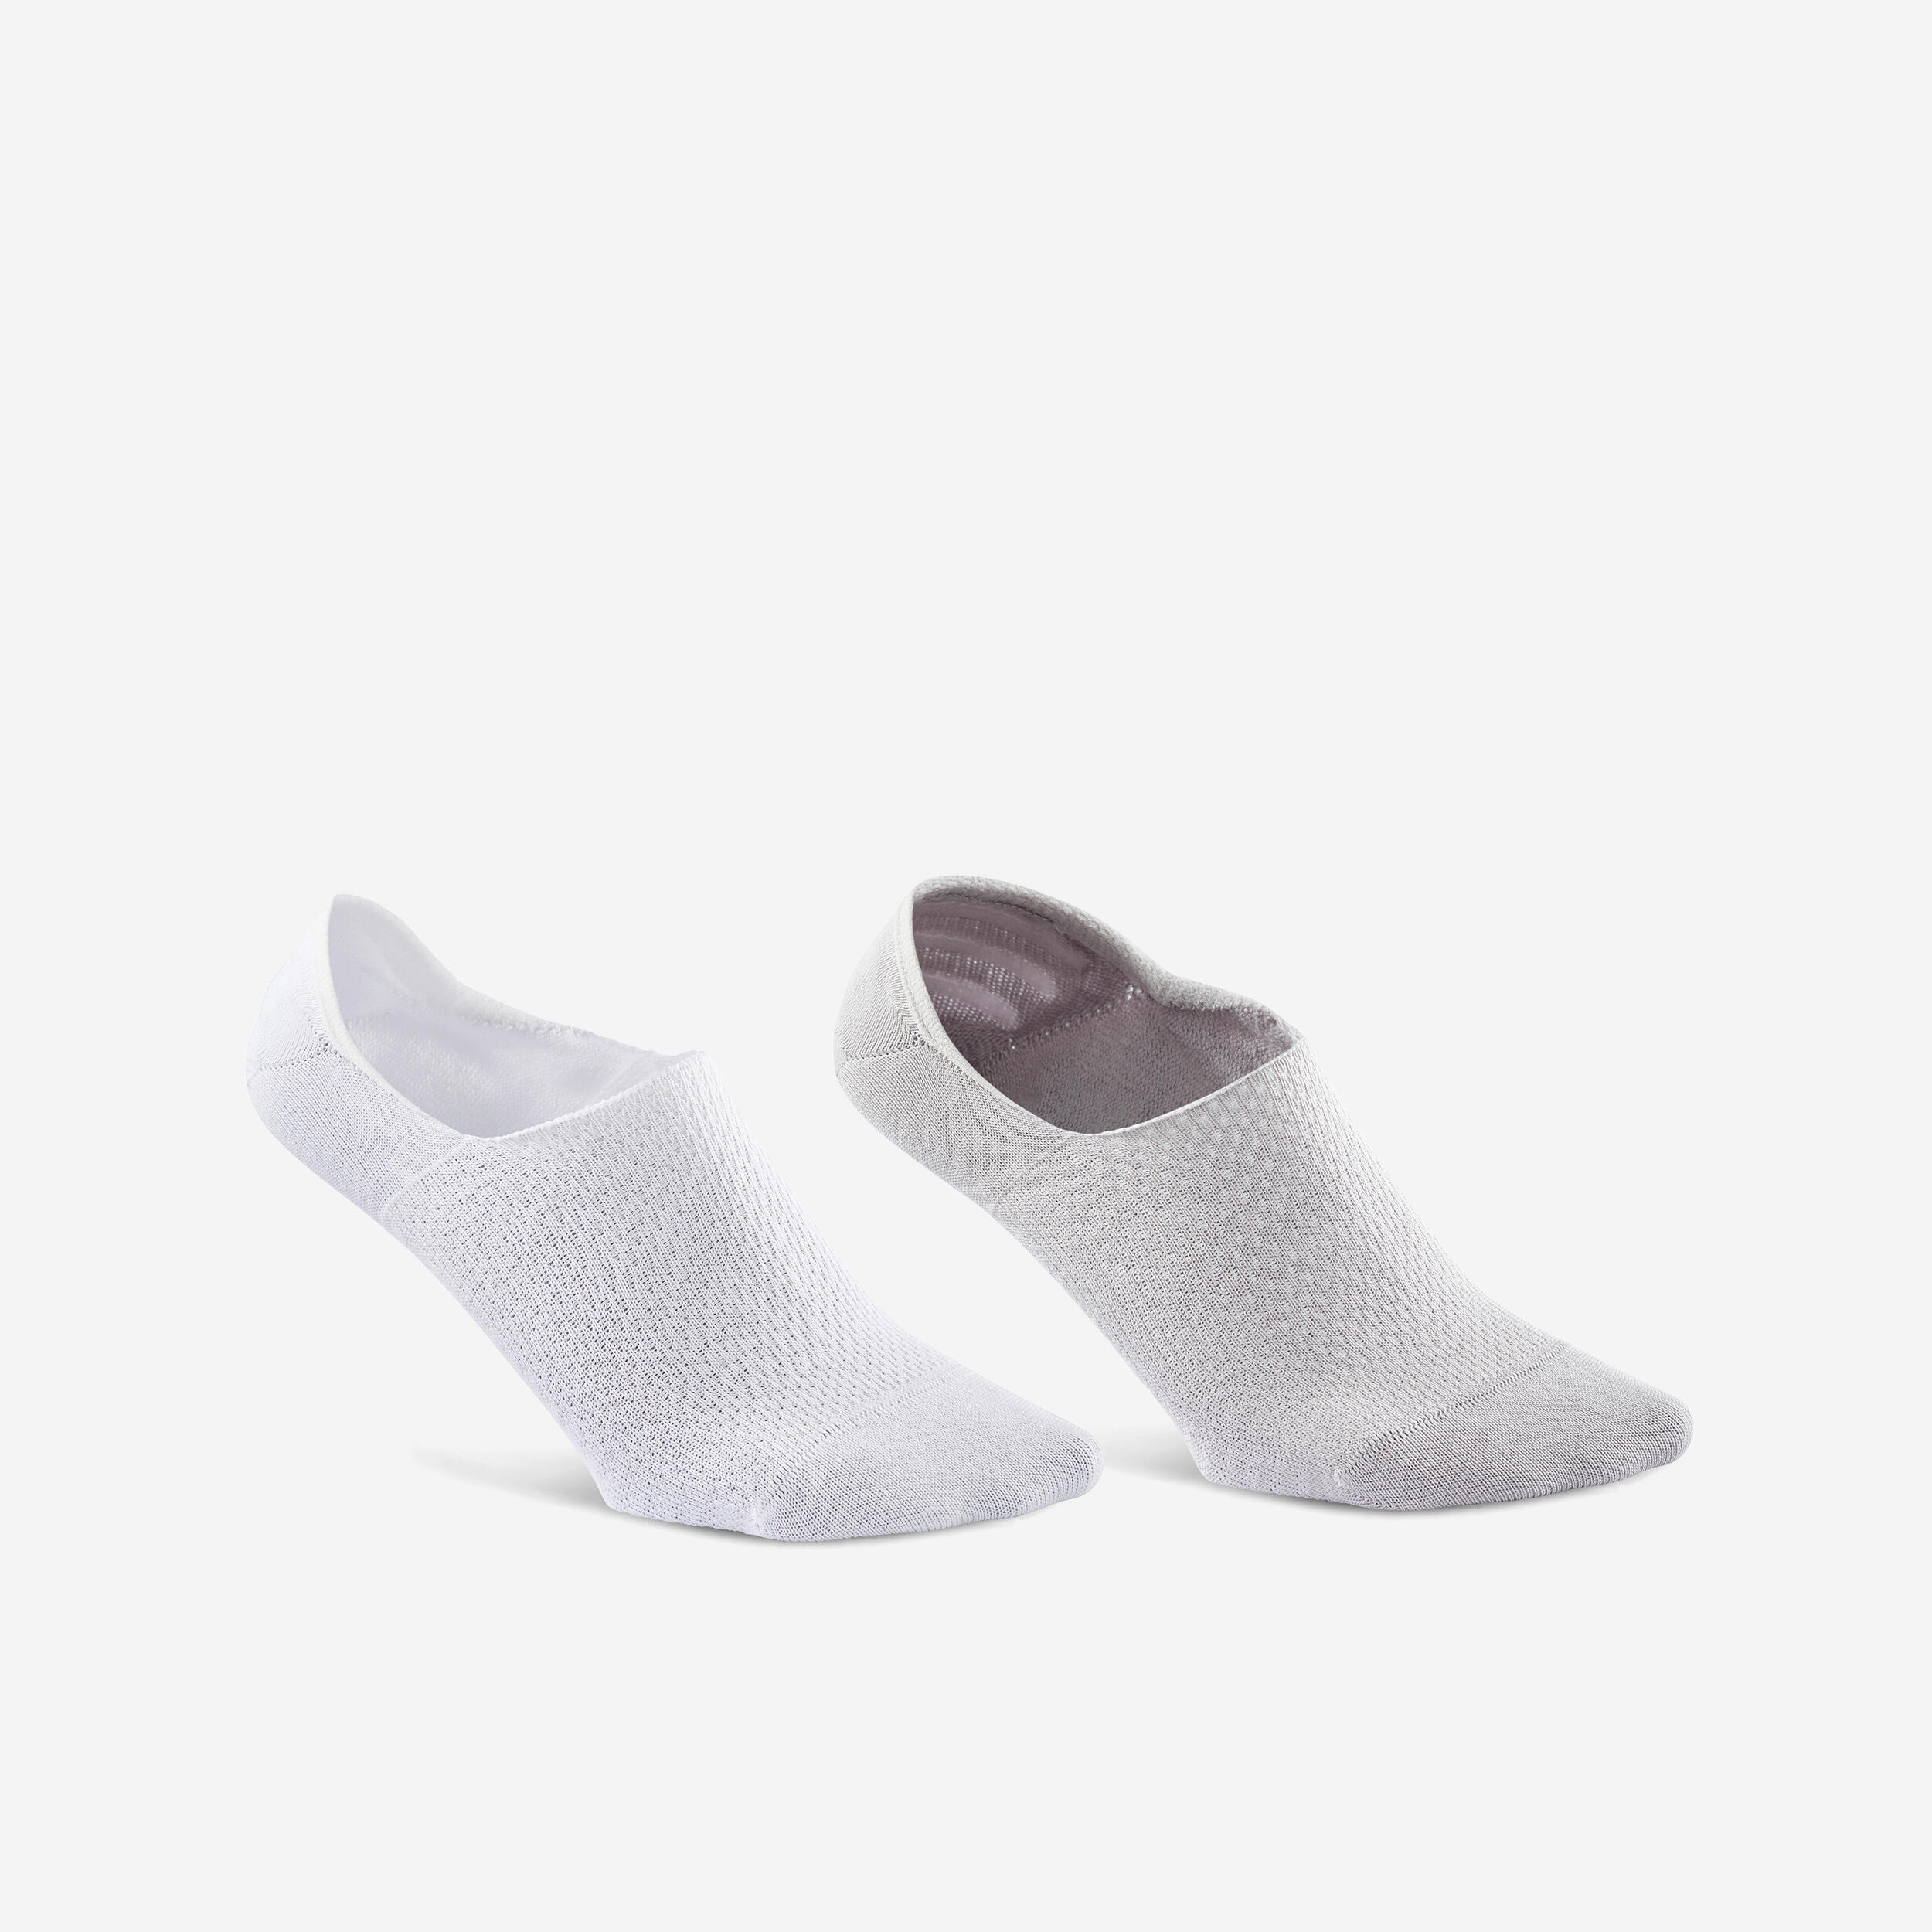 Invisible walking socks - pack of 2 pairs - white/grey 1/9